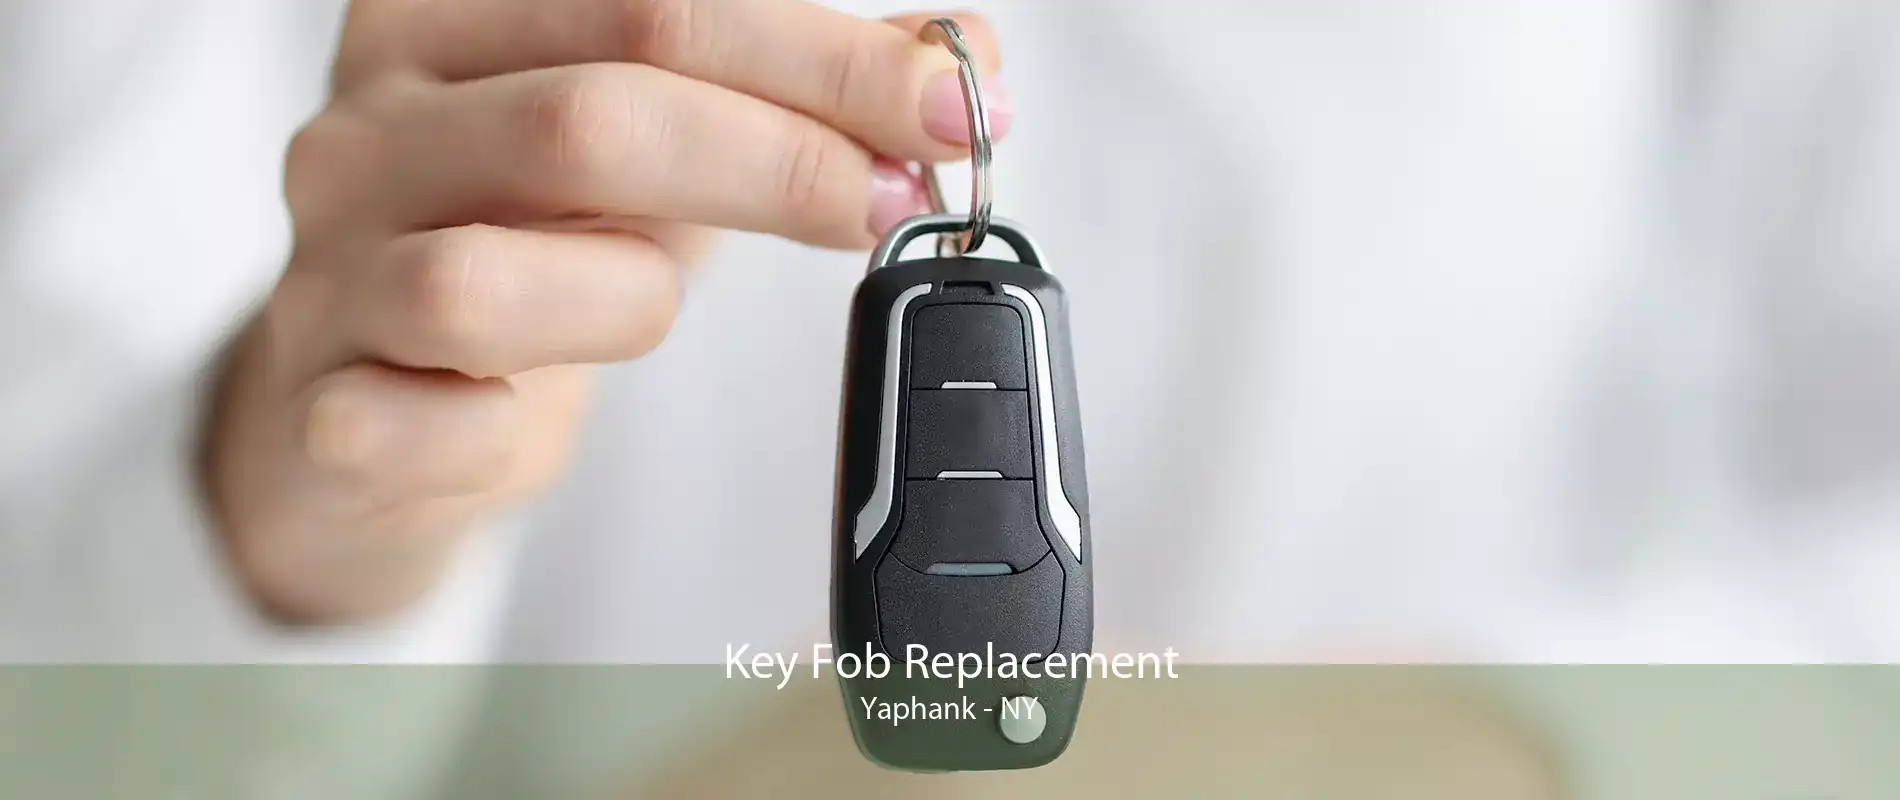 Key Fob Replacement Yaphank - NY